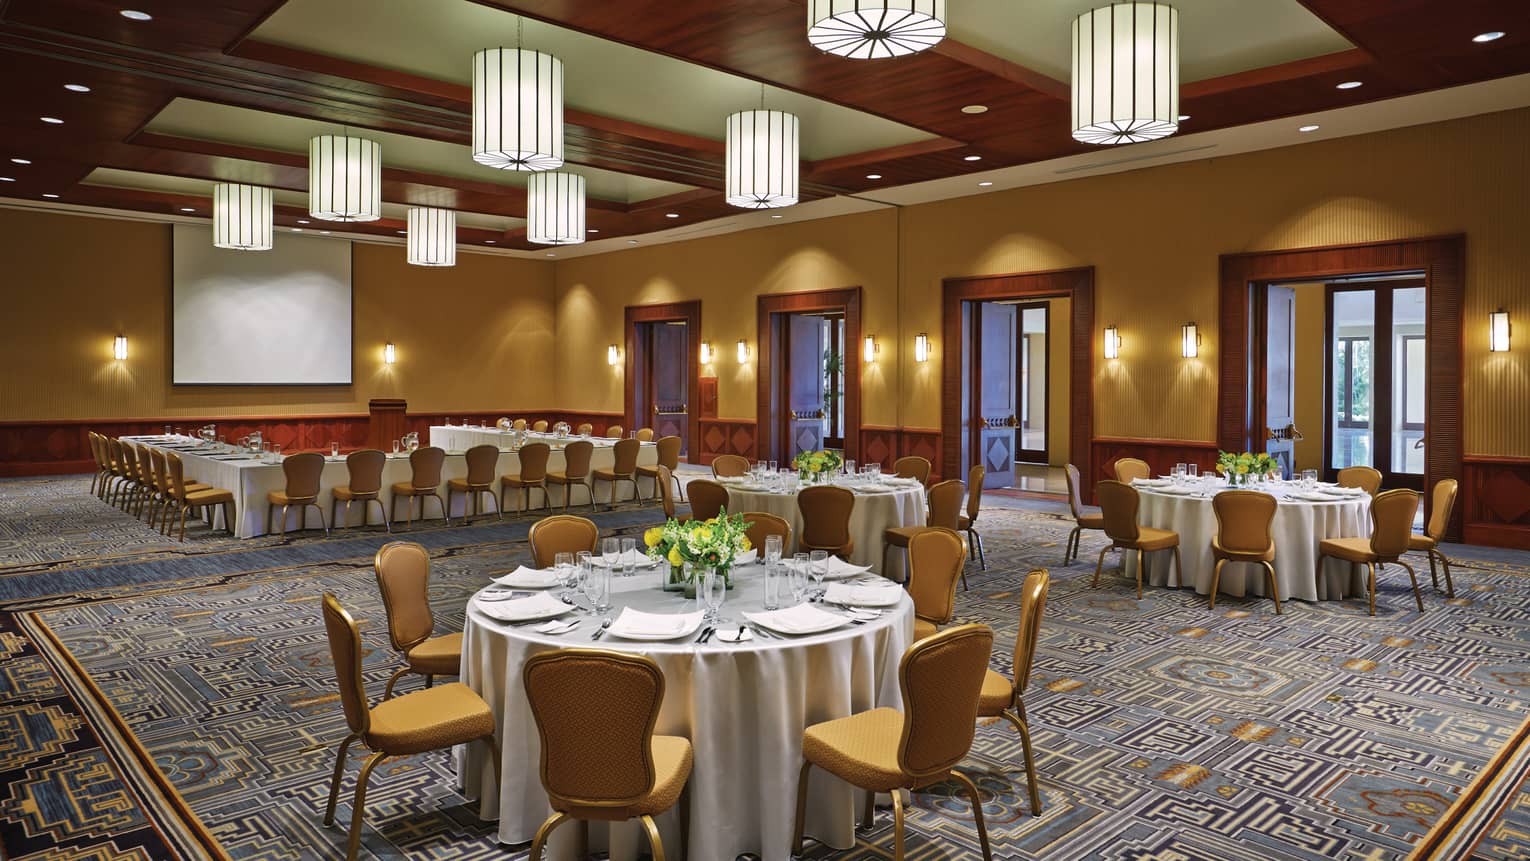 Small banquet dining tables in spacious Toki ballroom with wood accents